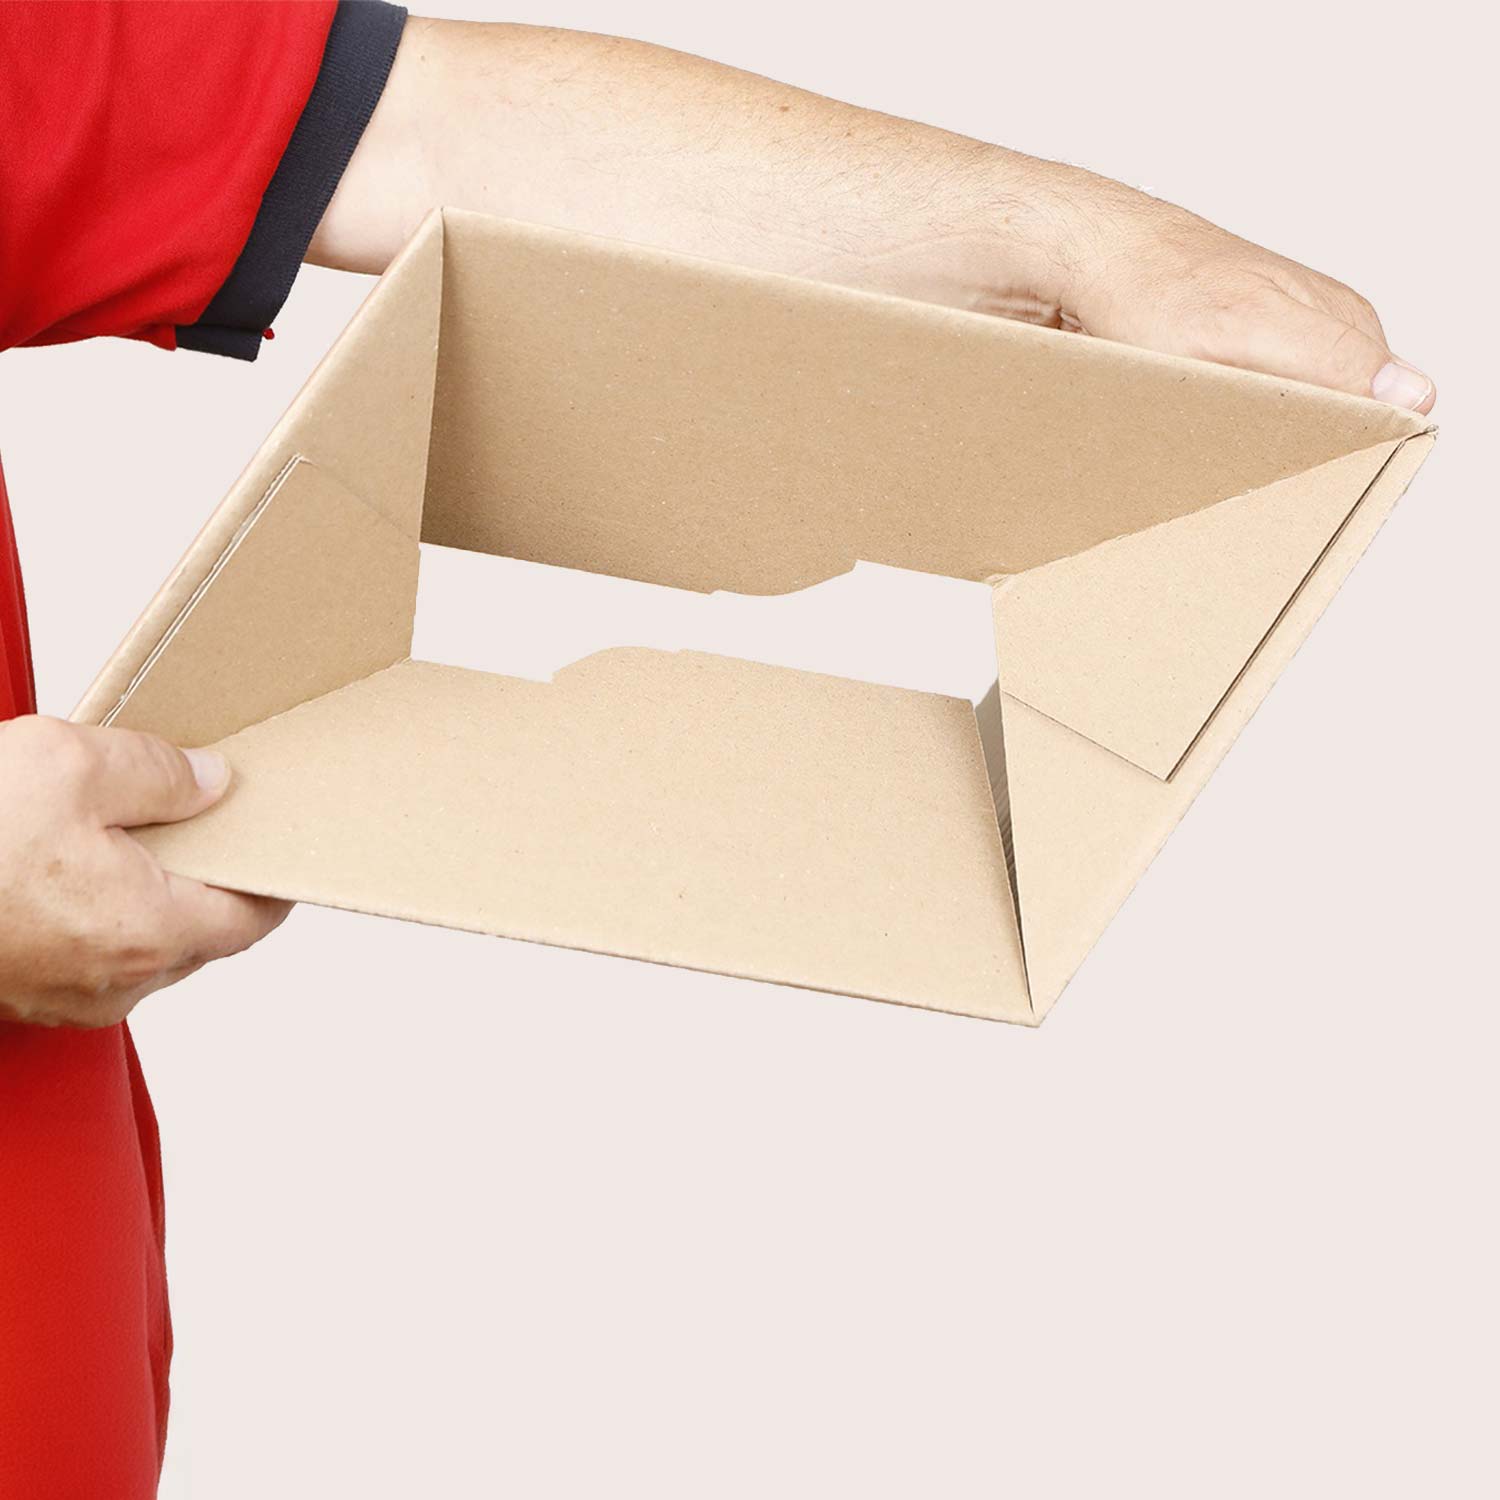 Assembling the cardboard box with an automatic base